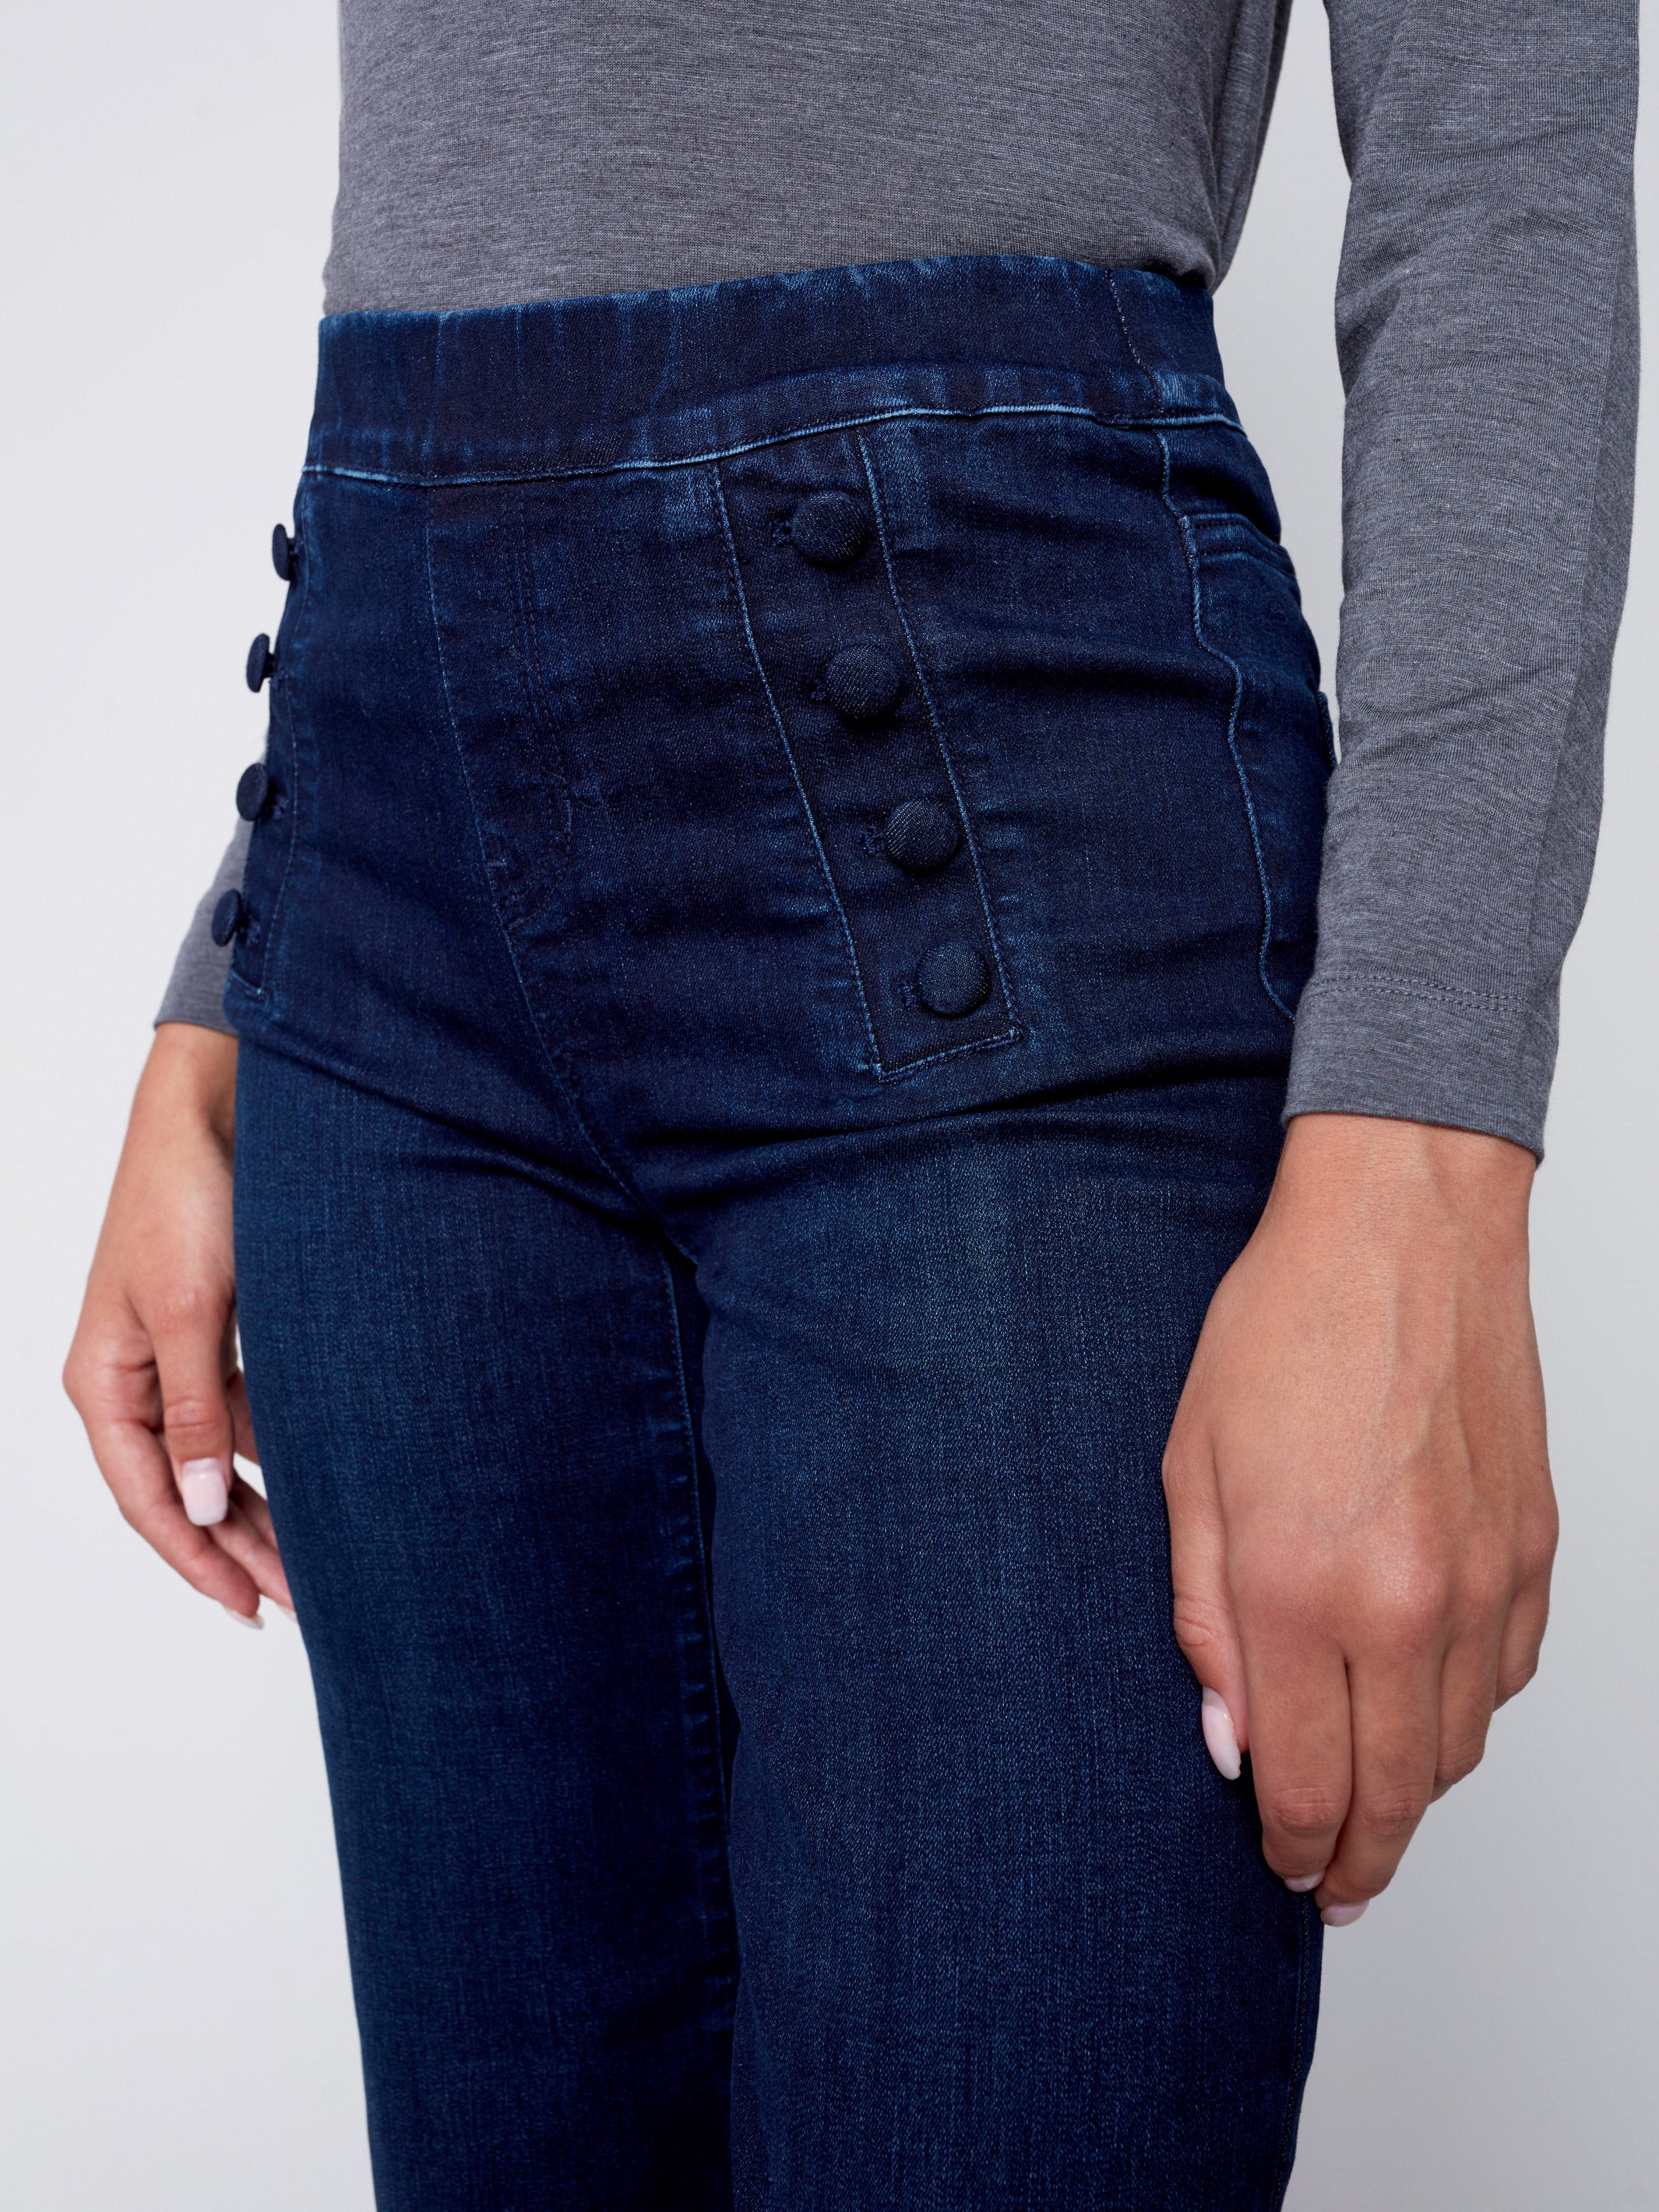 Flare Pull-on Jeans with Decorative Buttons - Blue Black